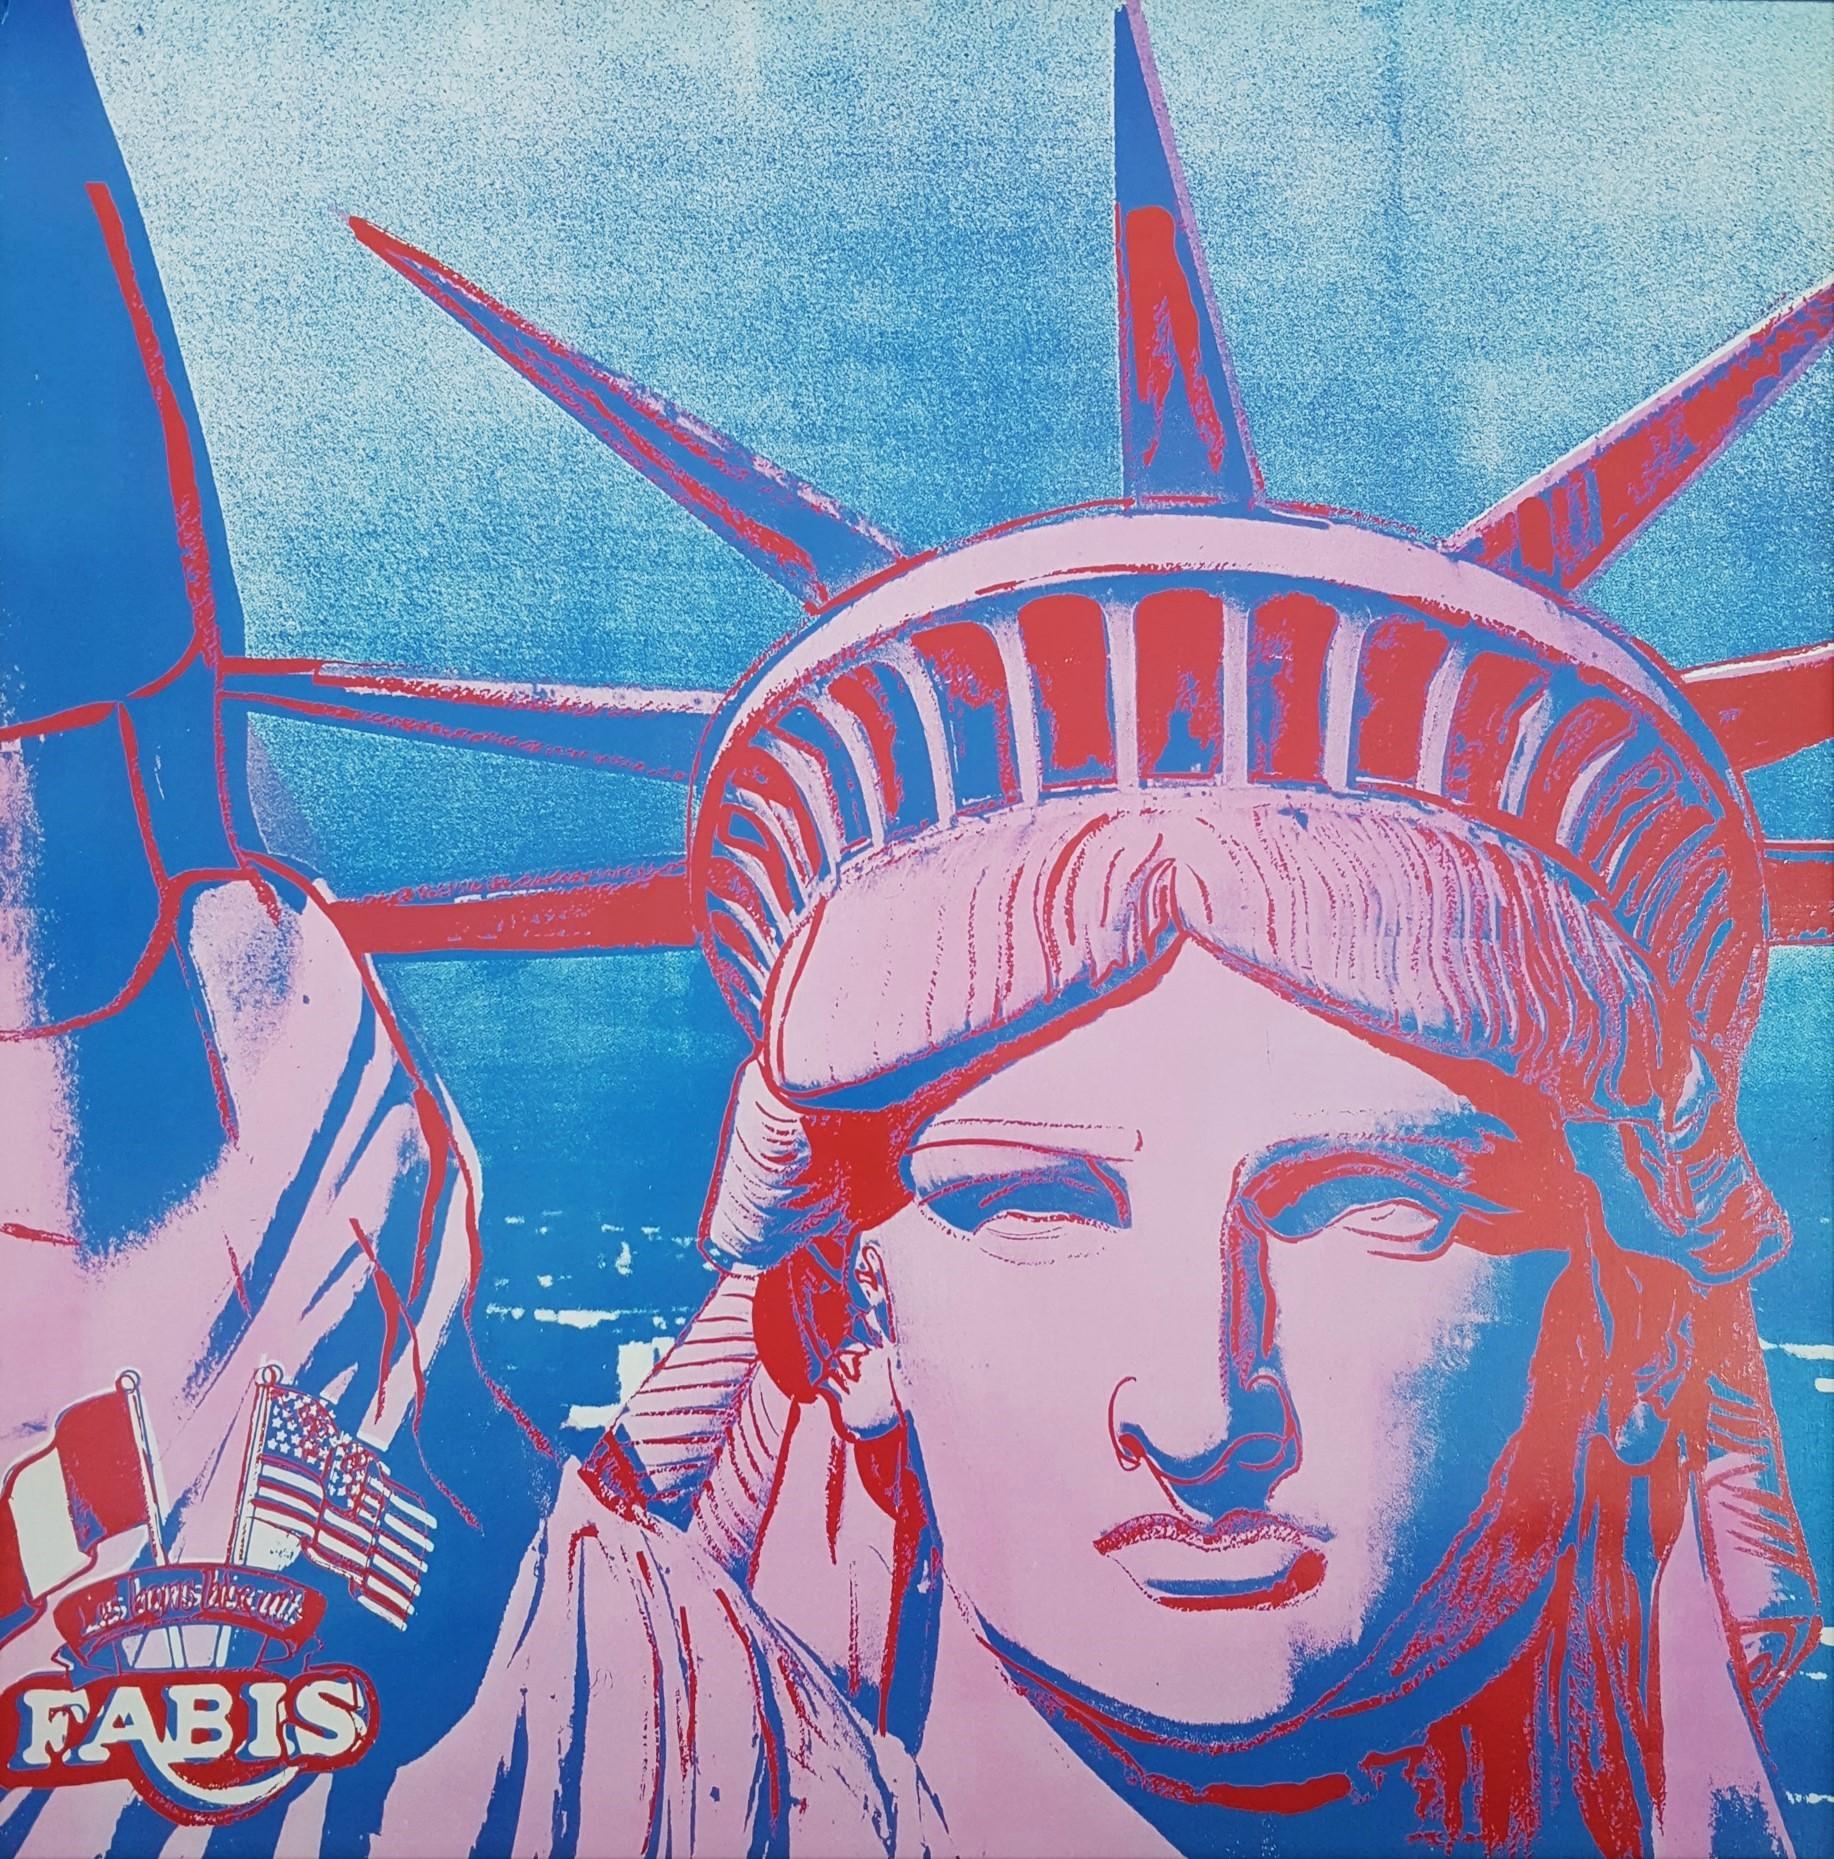 Galerie Lavignes Bastille (10 Statues of Liberty) - Print by (after) Andy Warhol